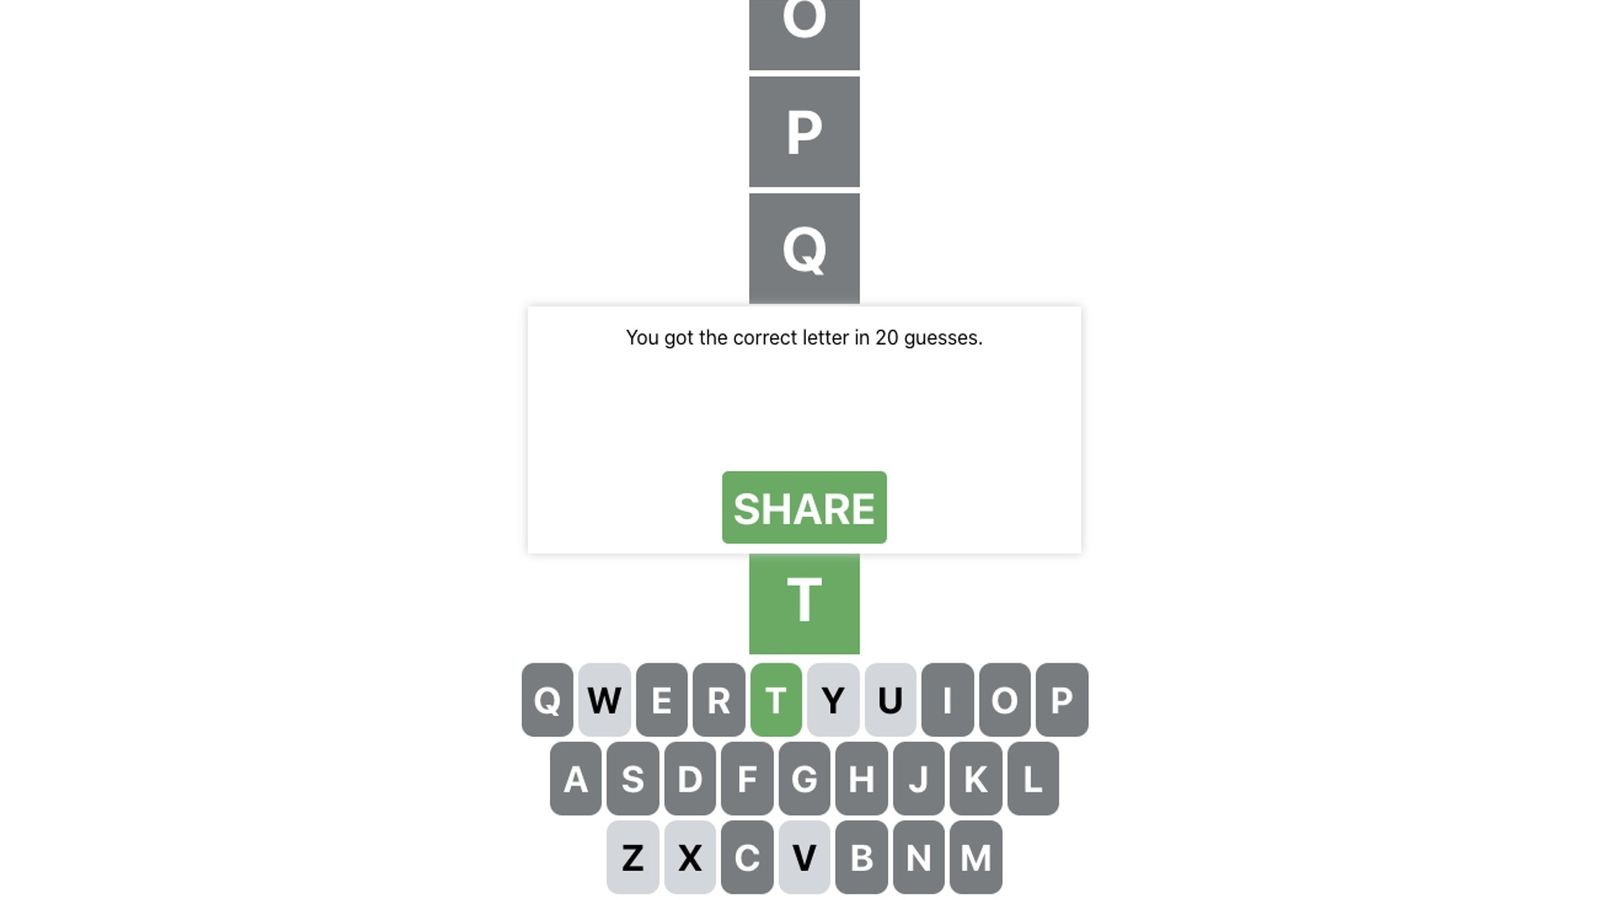 Image of a successful guess after 20 attempts in Letterle